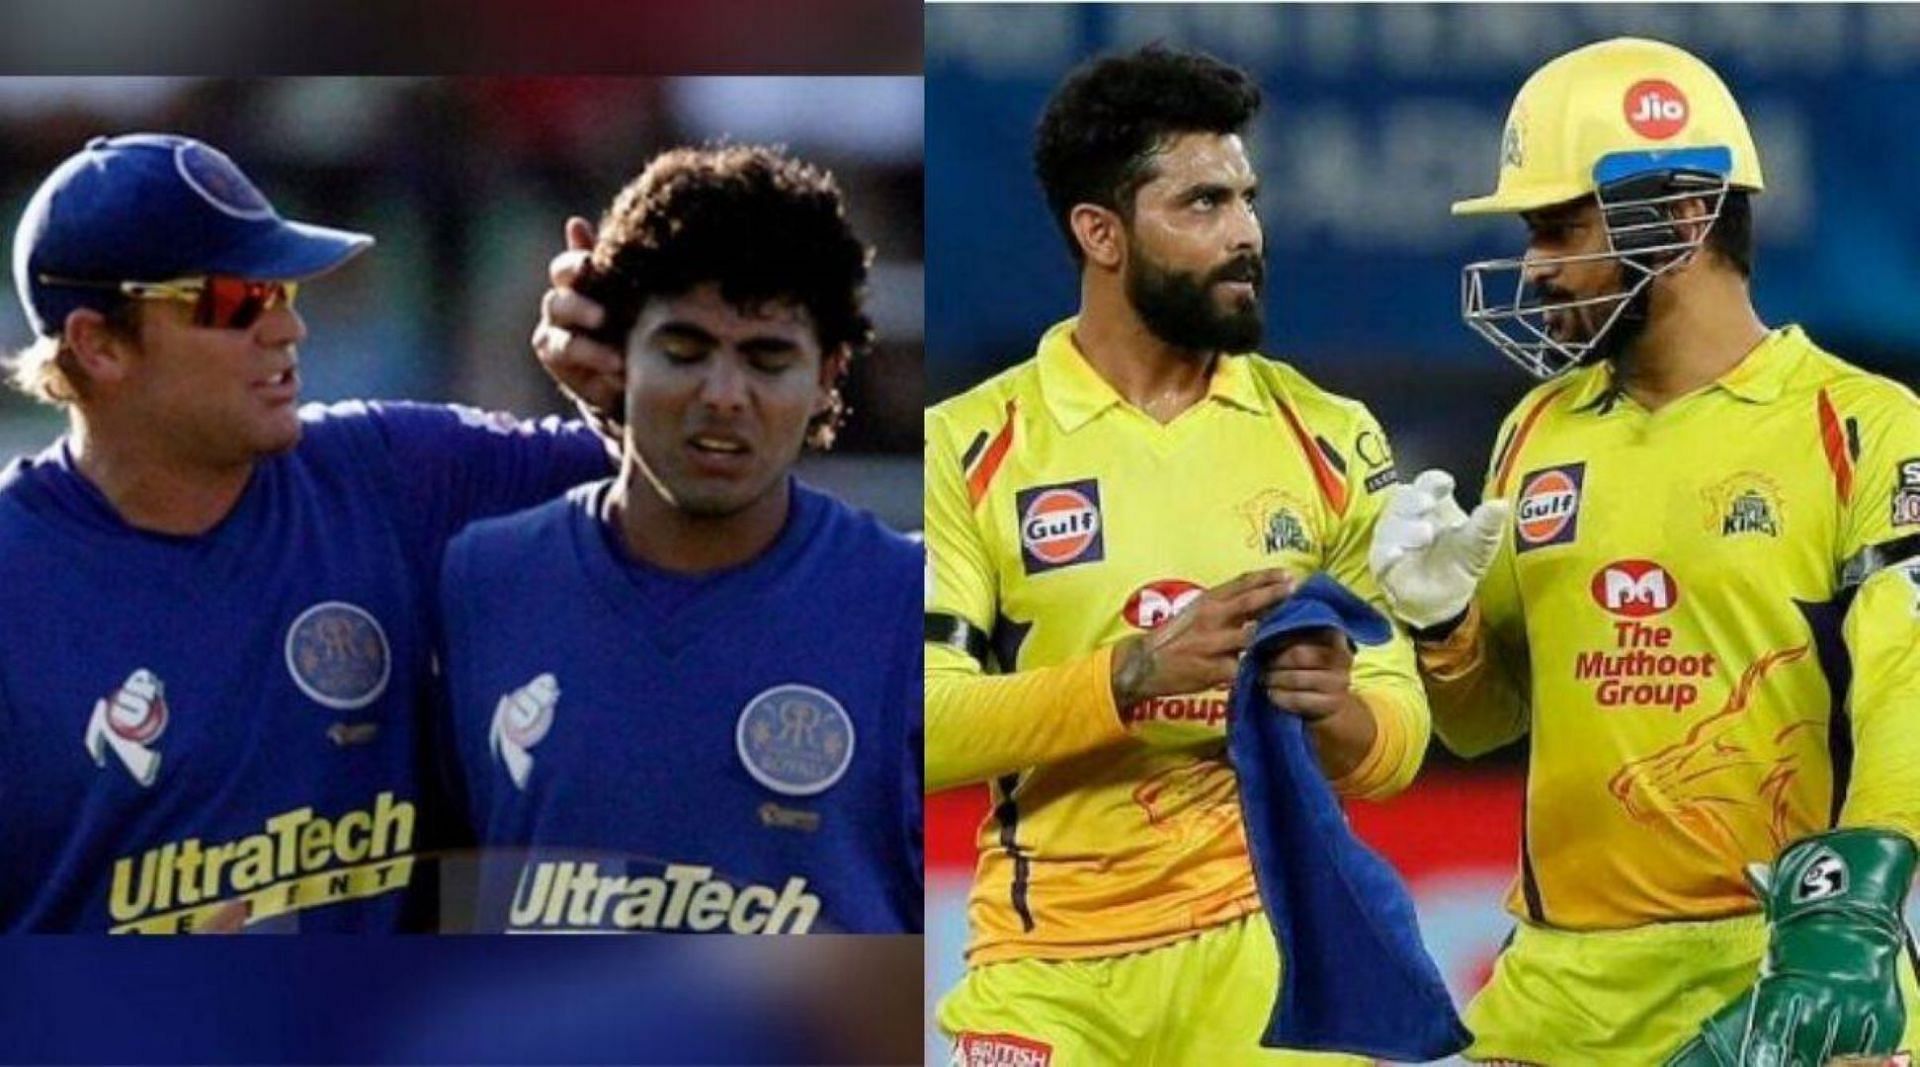 Ravindra Jadeja has played under two of the greatest captains, Shane Warne and MS Dhoni